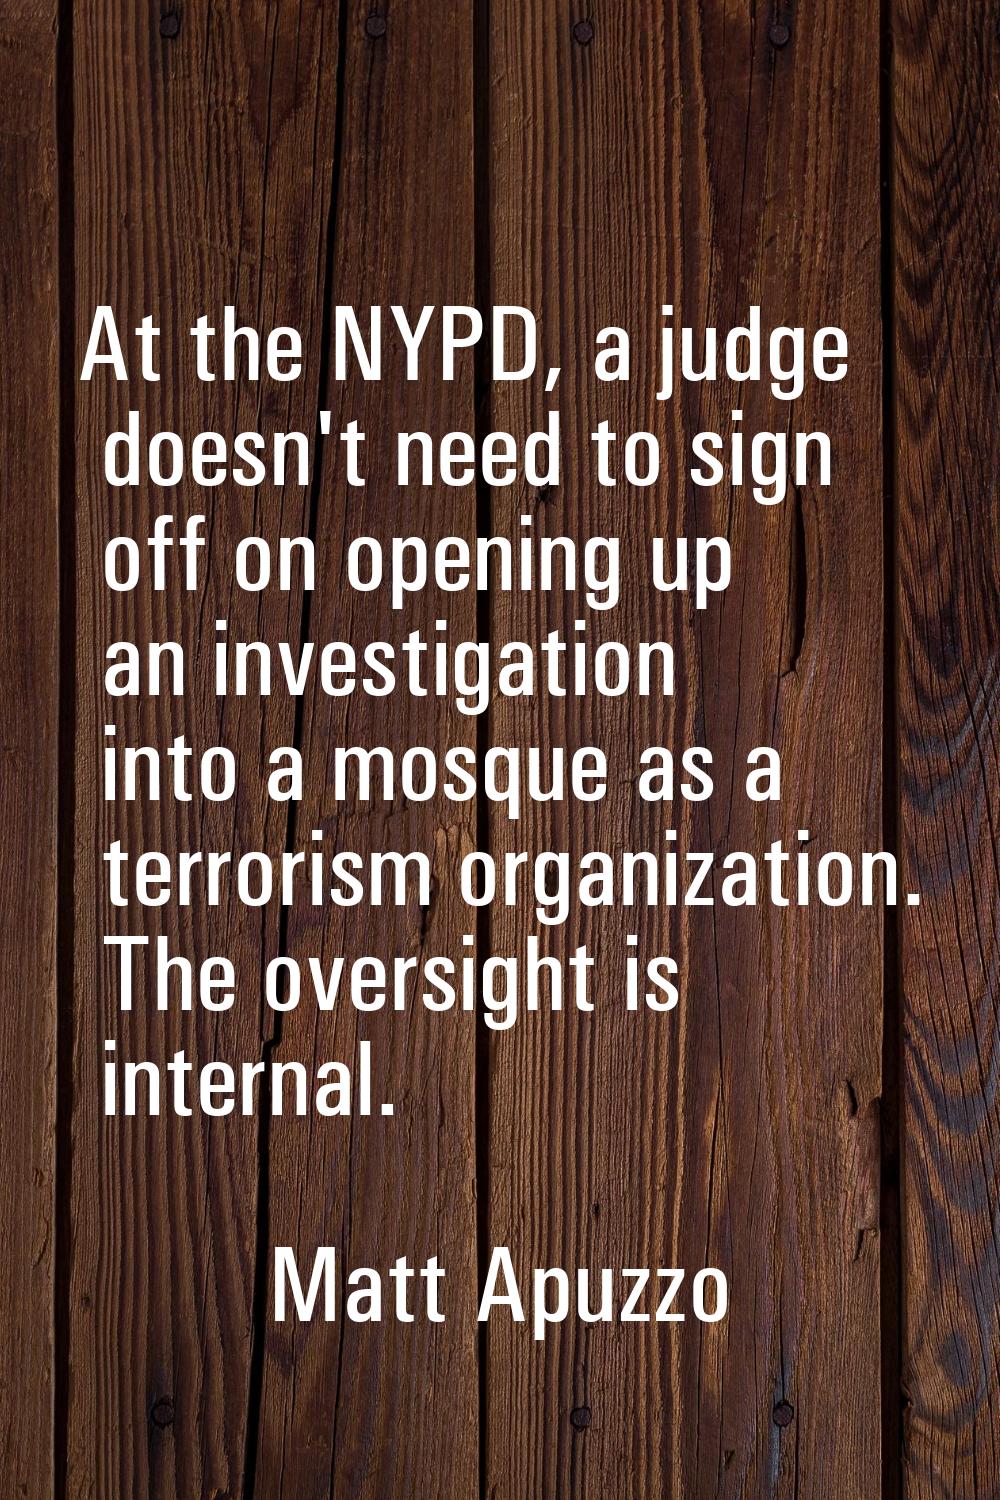 At the NYPD, a judge doesn't need to sign off on opening up an investigation into a mosque as a ter